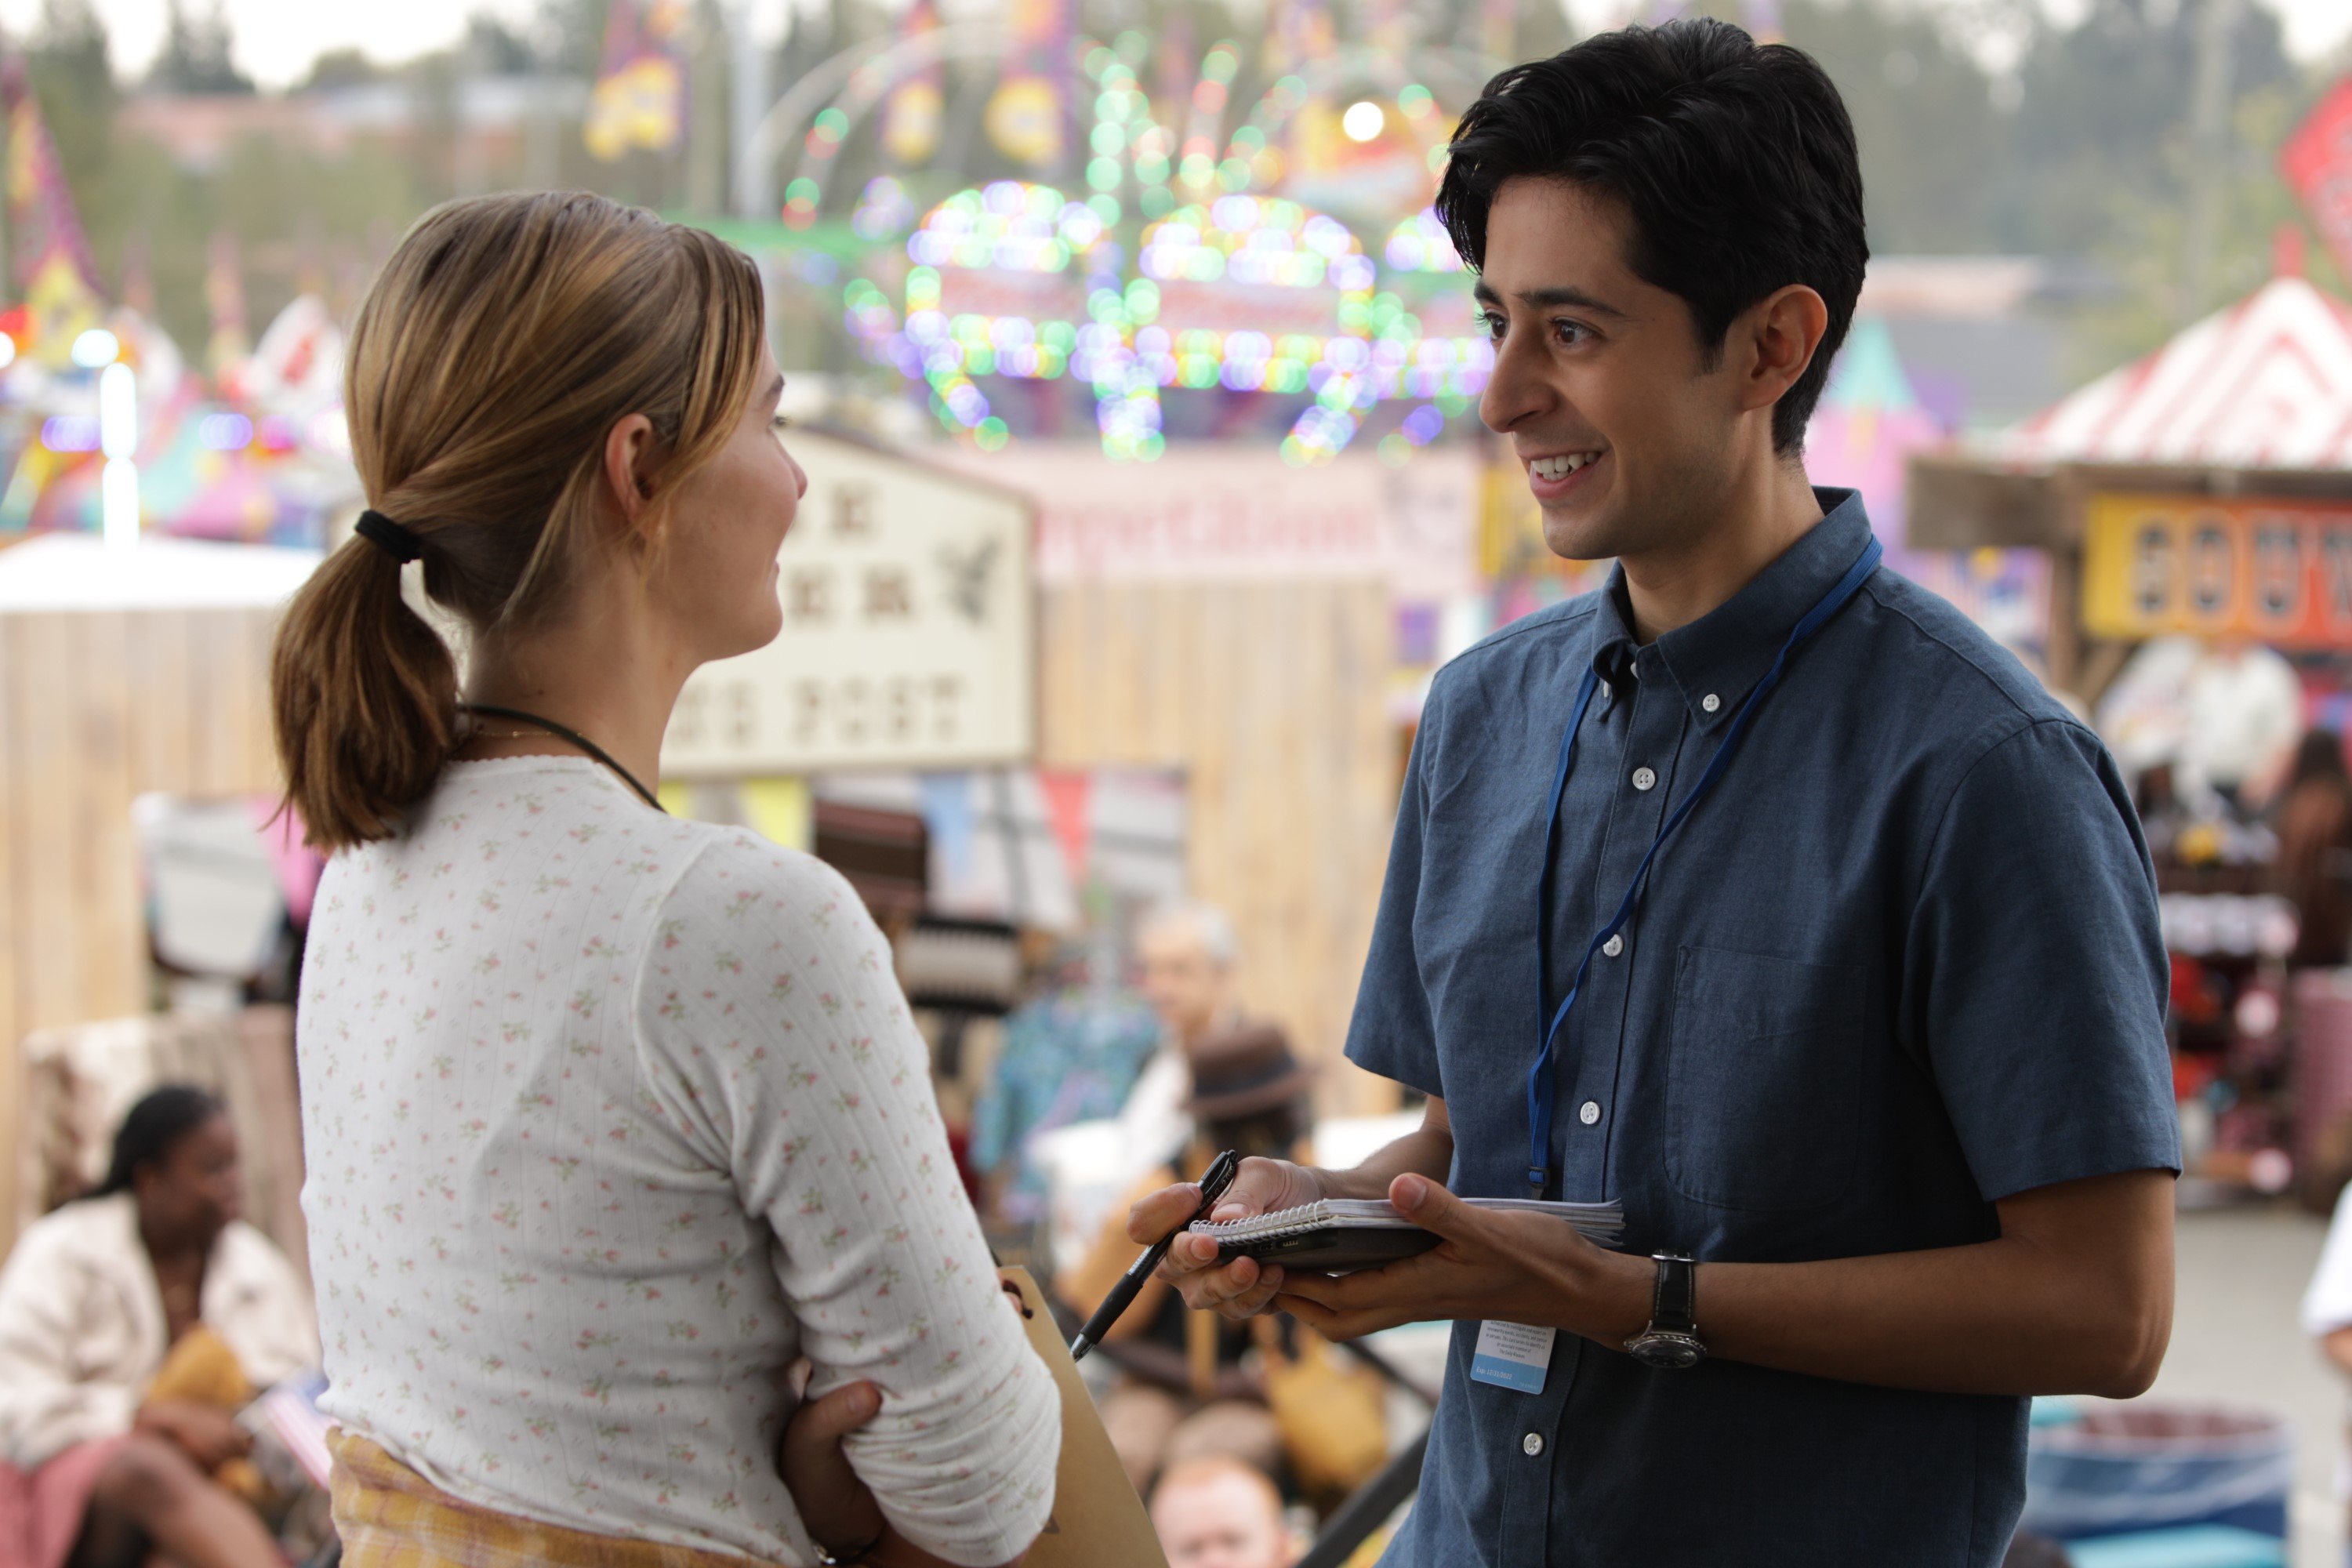 Stephanie Scott and Pablo Castelblanco, in character as Erica and Gabriel in 'Alaska Daily' Season 1 Episode 4, share a scene. Erica wears a white long-sleeved shirt. Gabriel wears a dark blue short-sleeved button-up shirt.